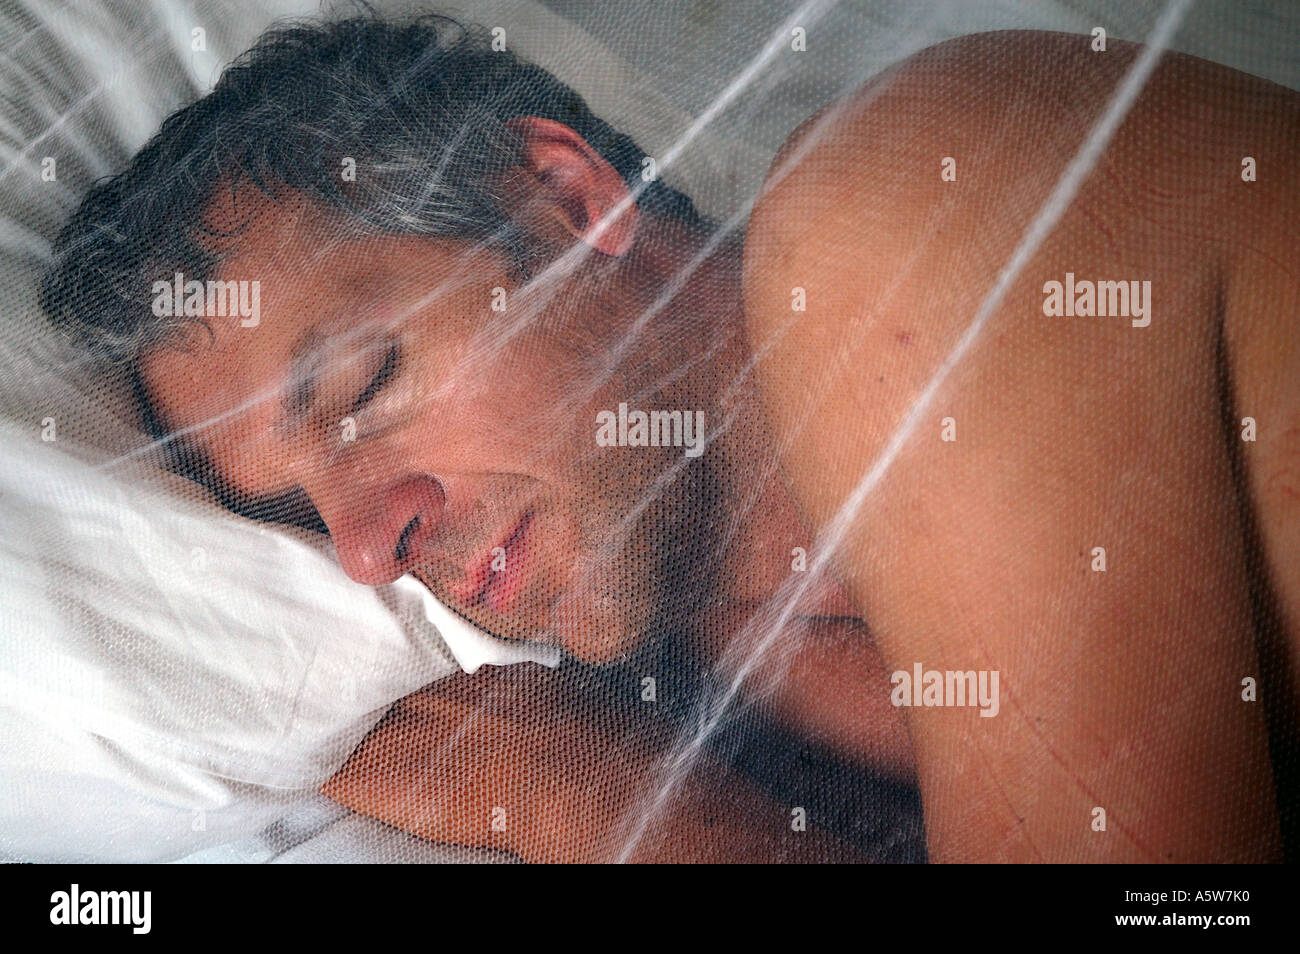 Traveller sleeping safely under a mosquito net in a hotel room in a tropical country Stock Photo